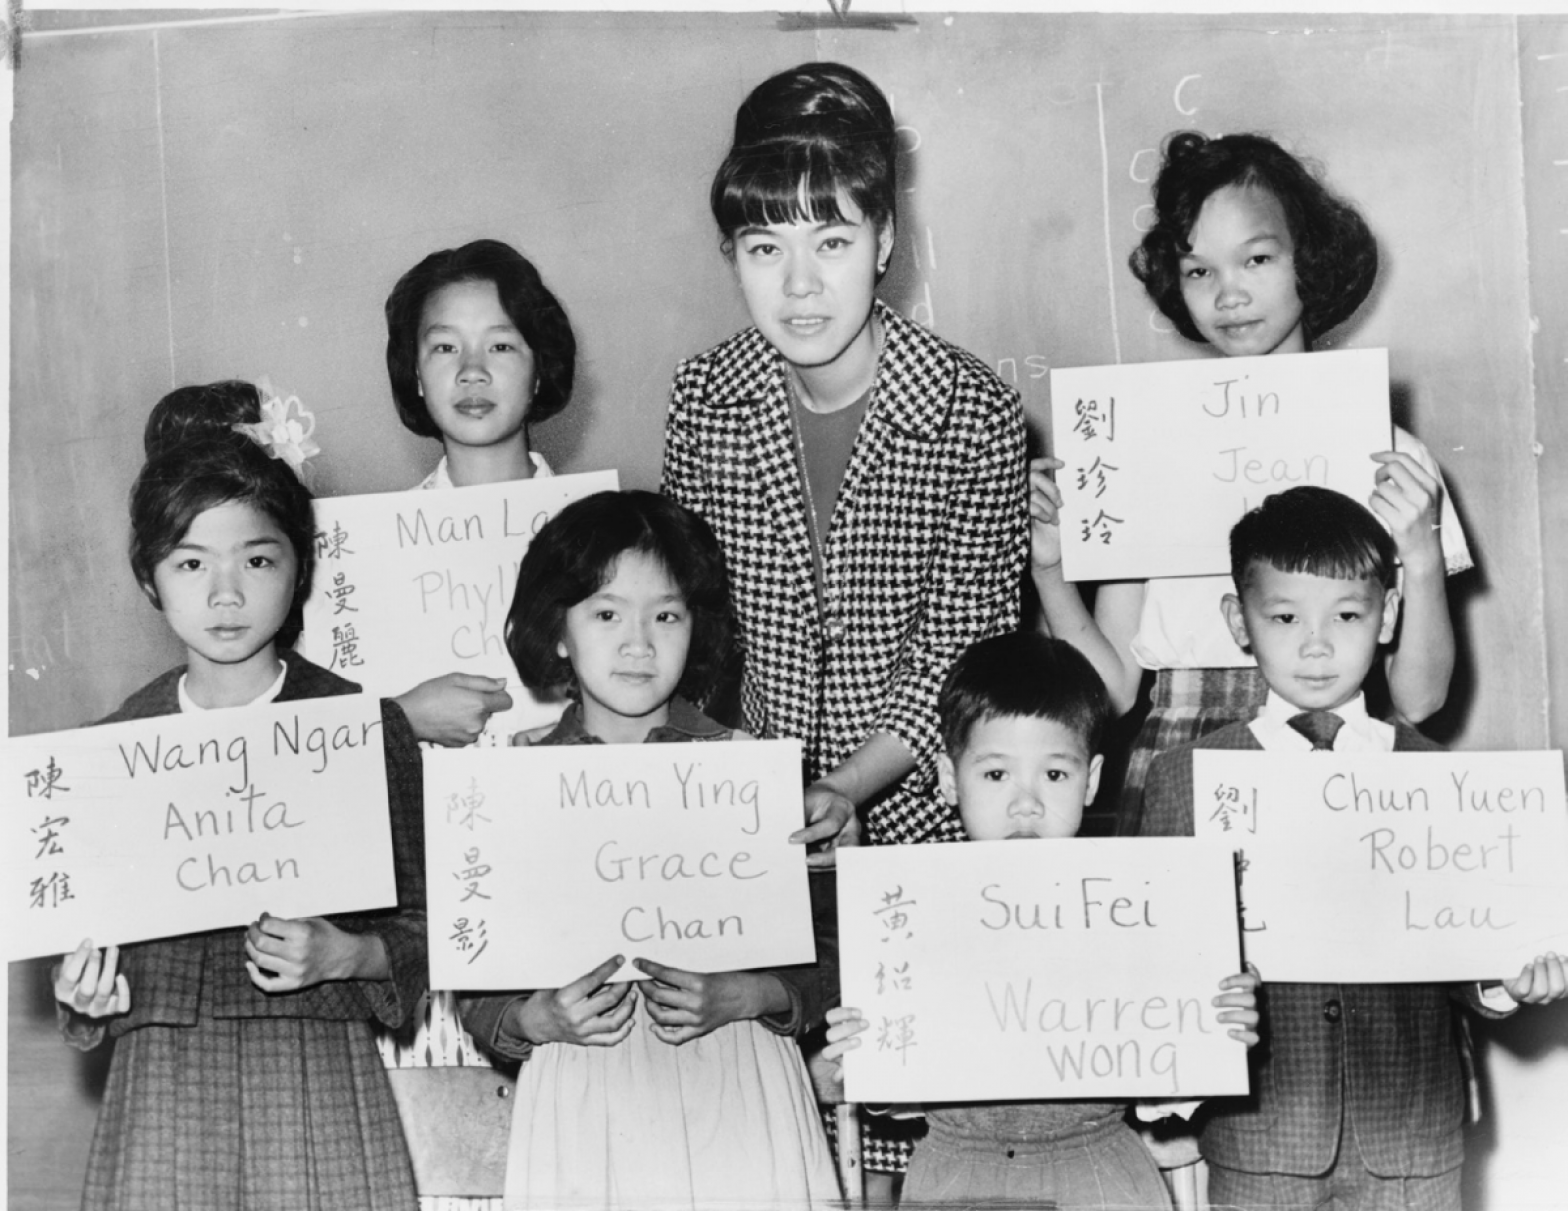 Six Chinese children who had recently arrived in New York City in 1964 with their teacher. The placards show their Chinese names, in ideographs and in transliteration, and the names to be entered in official school records. Library of Congress